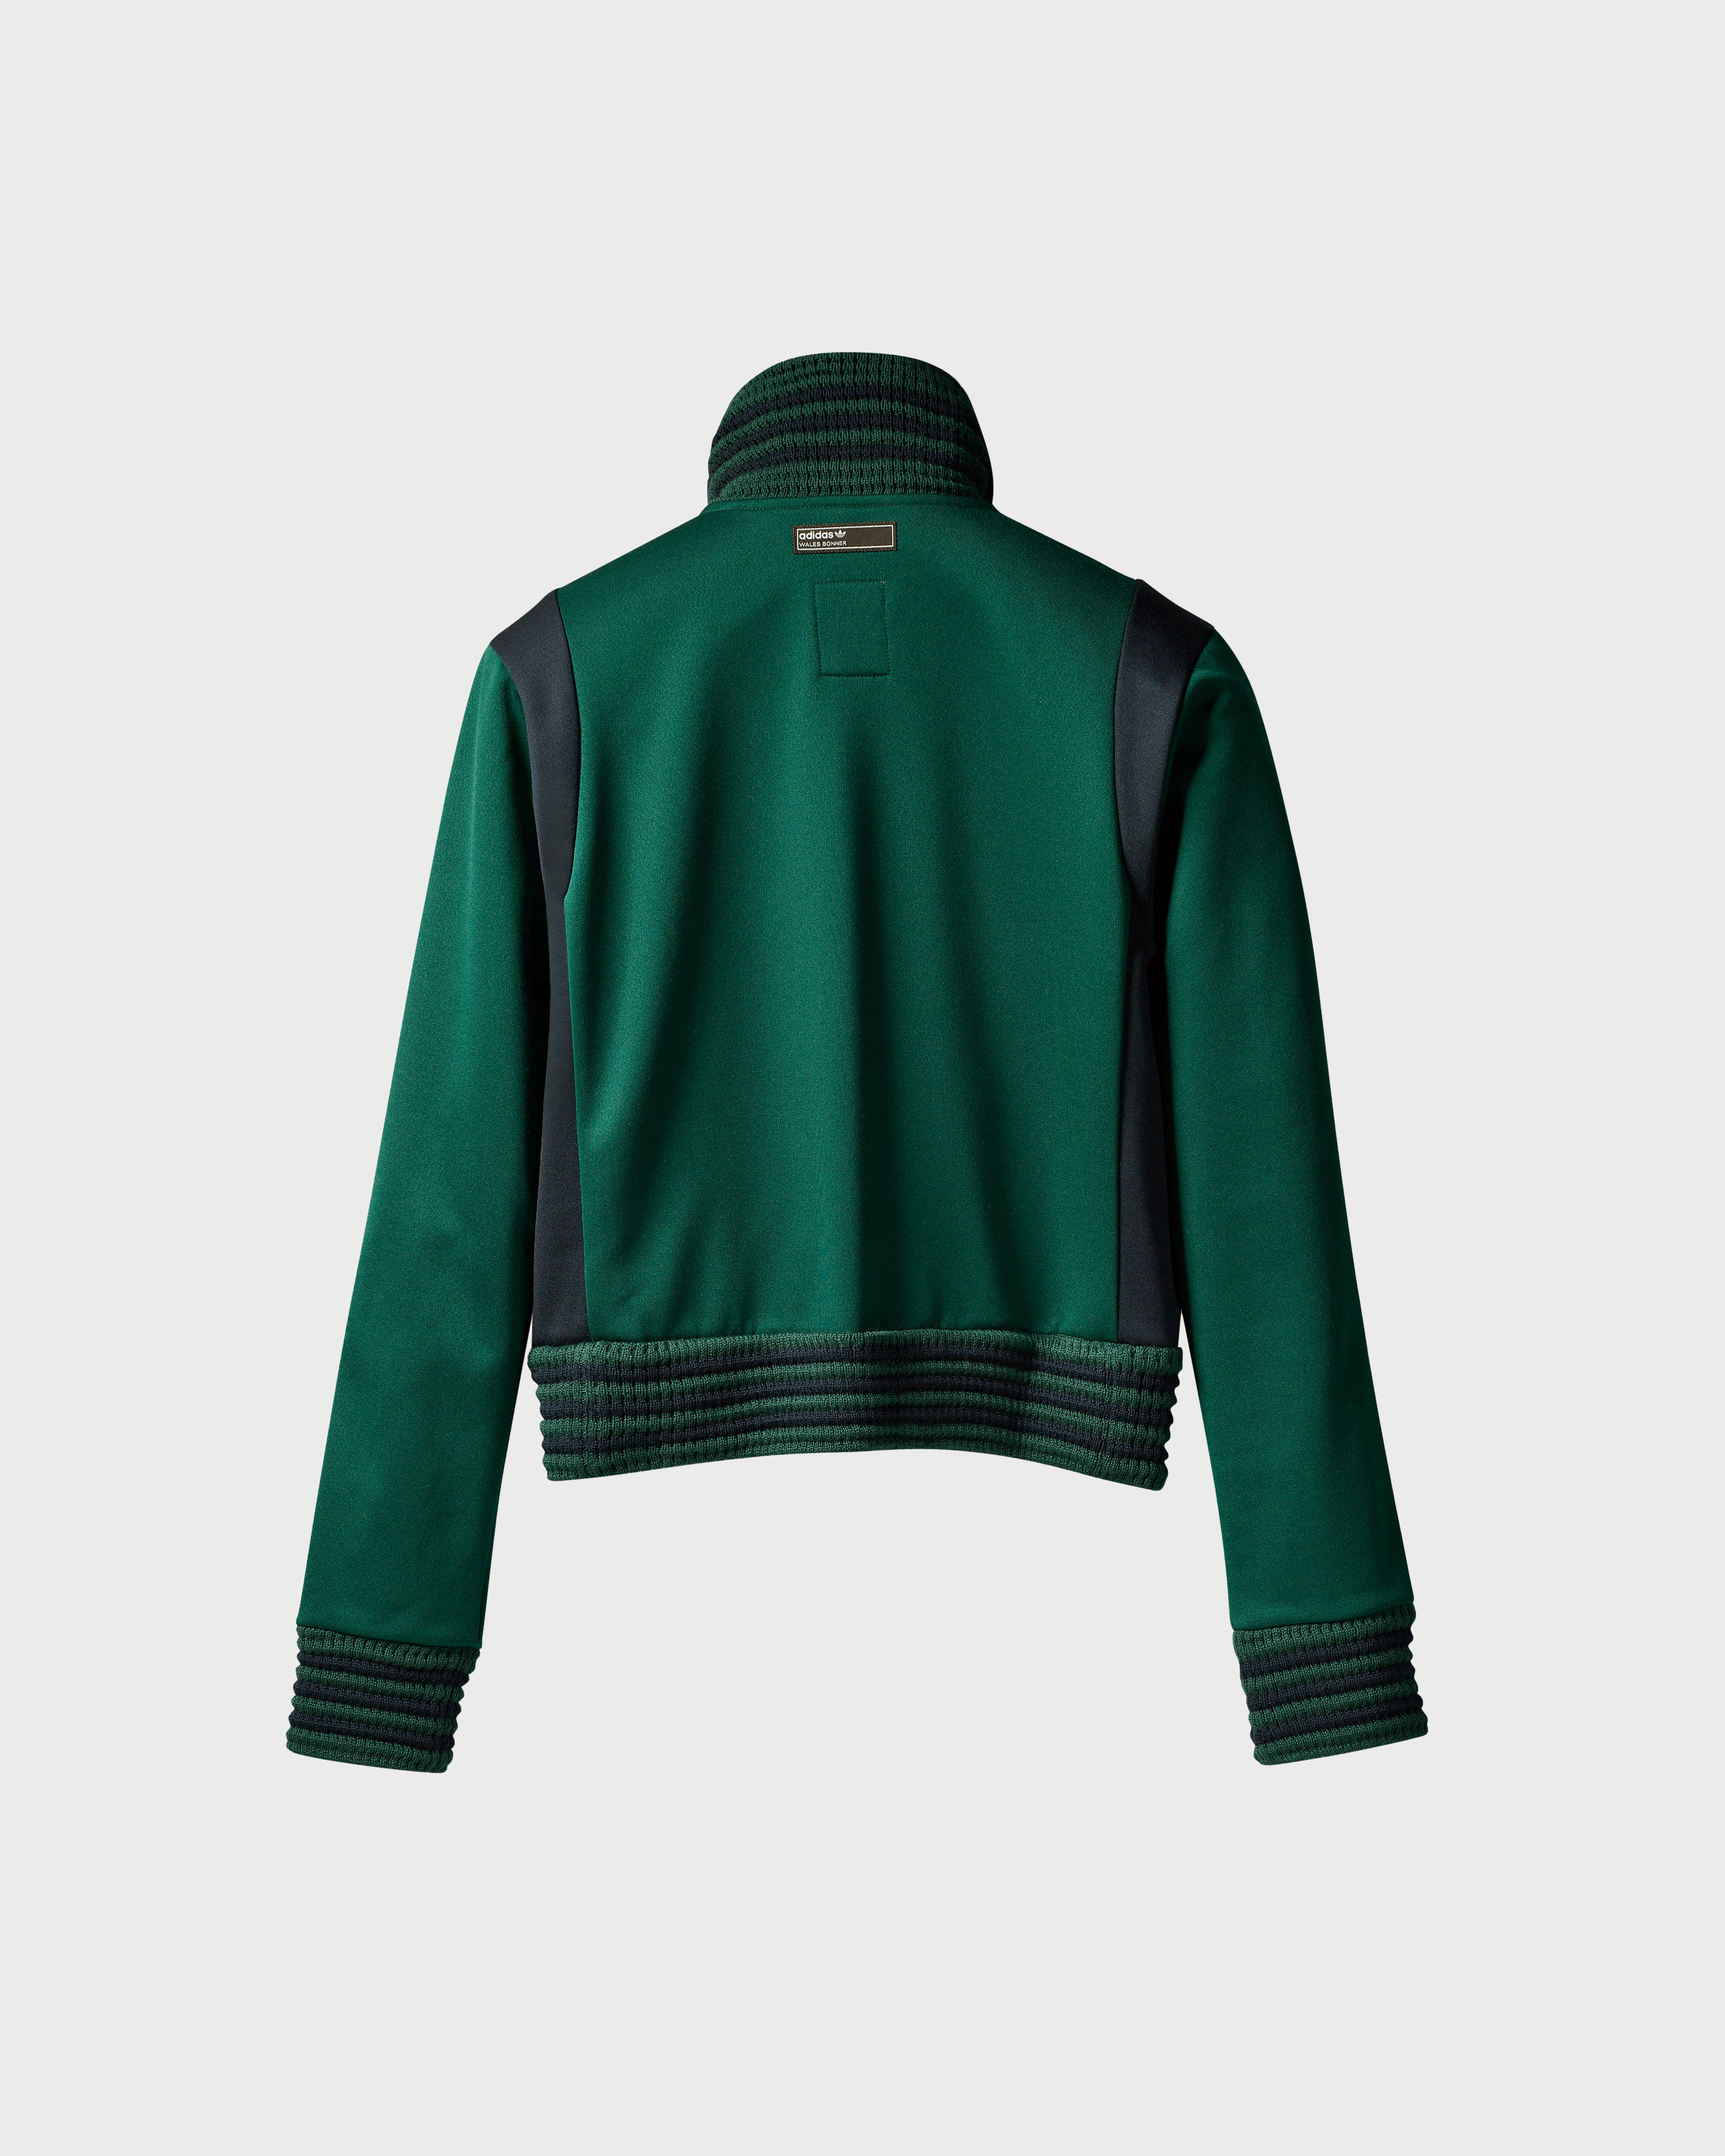 Adidas x Wales Bonner - Lovers Track Top Green - Clothing - Green - Image 2